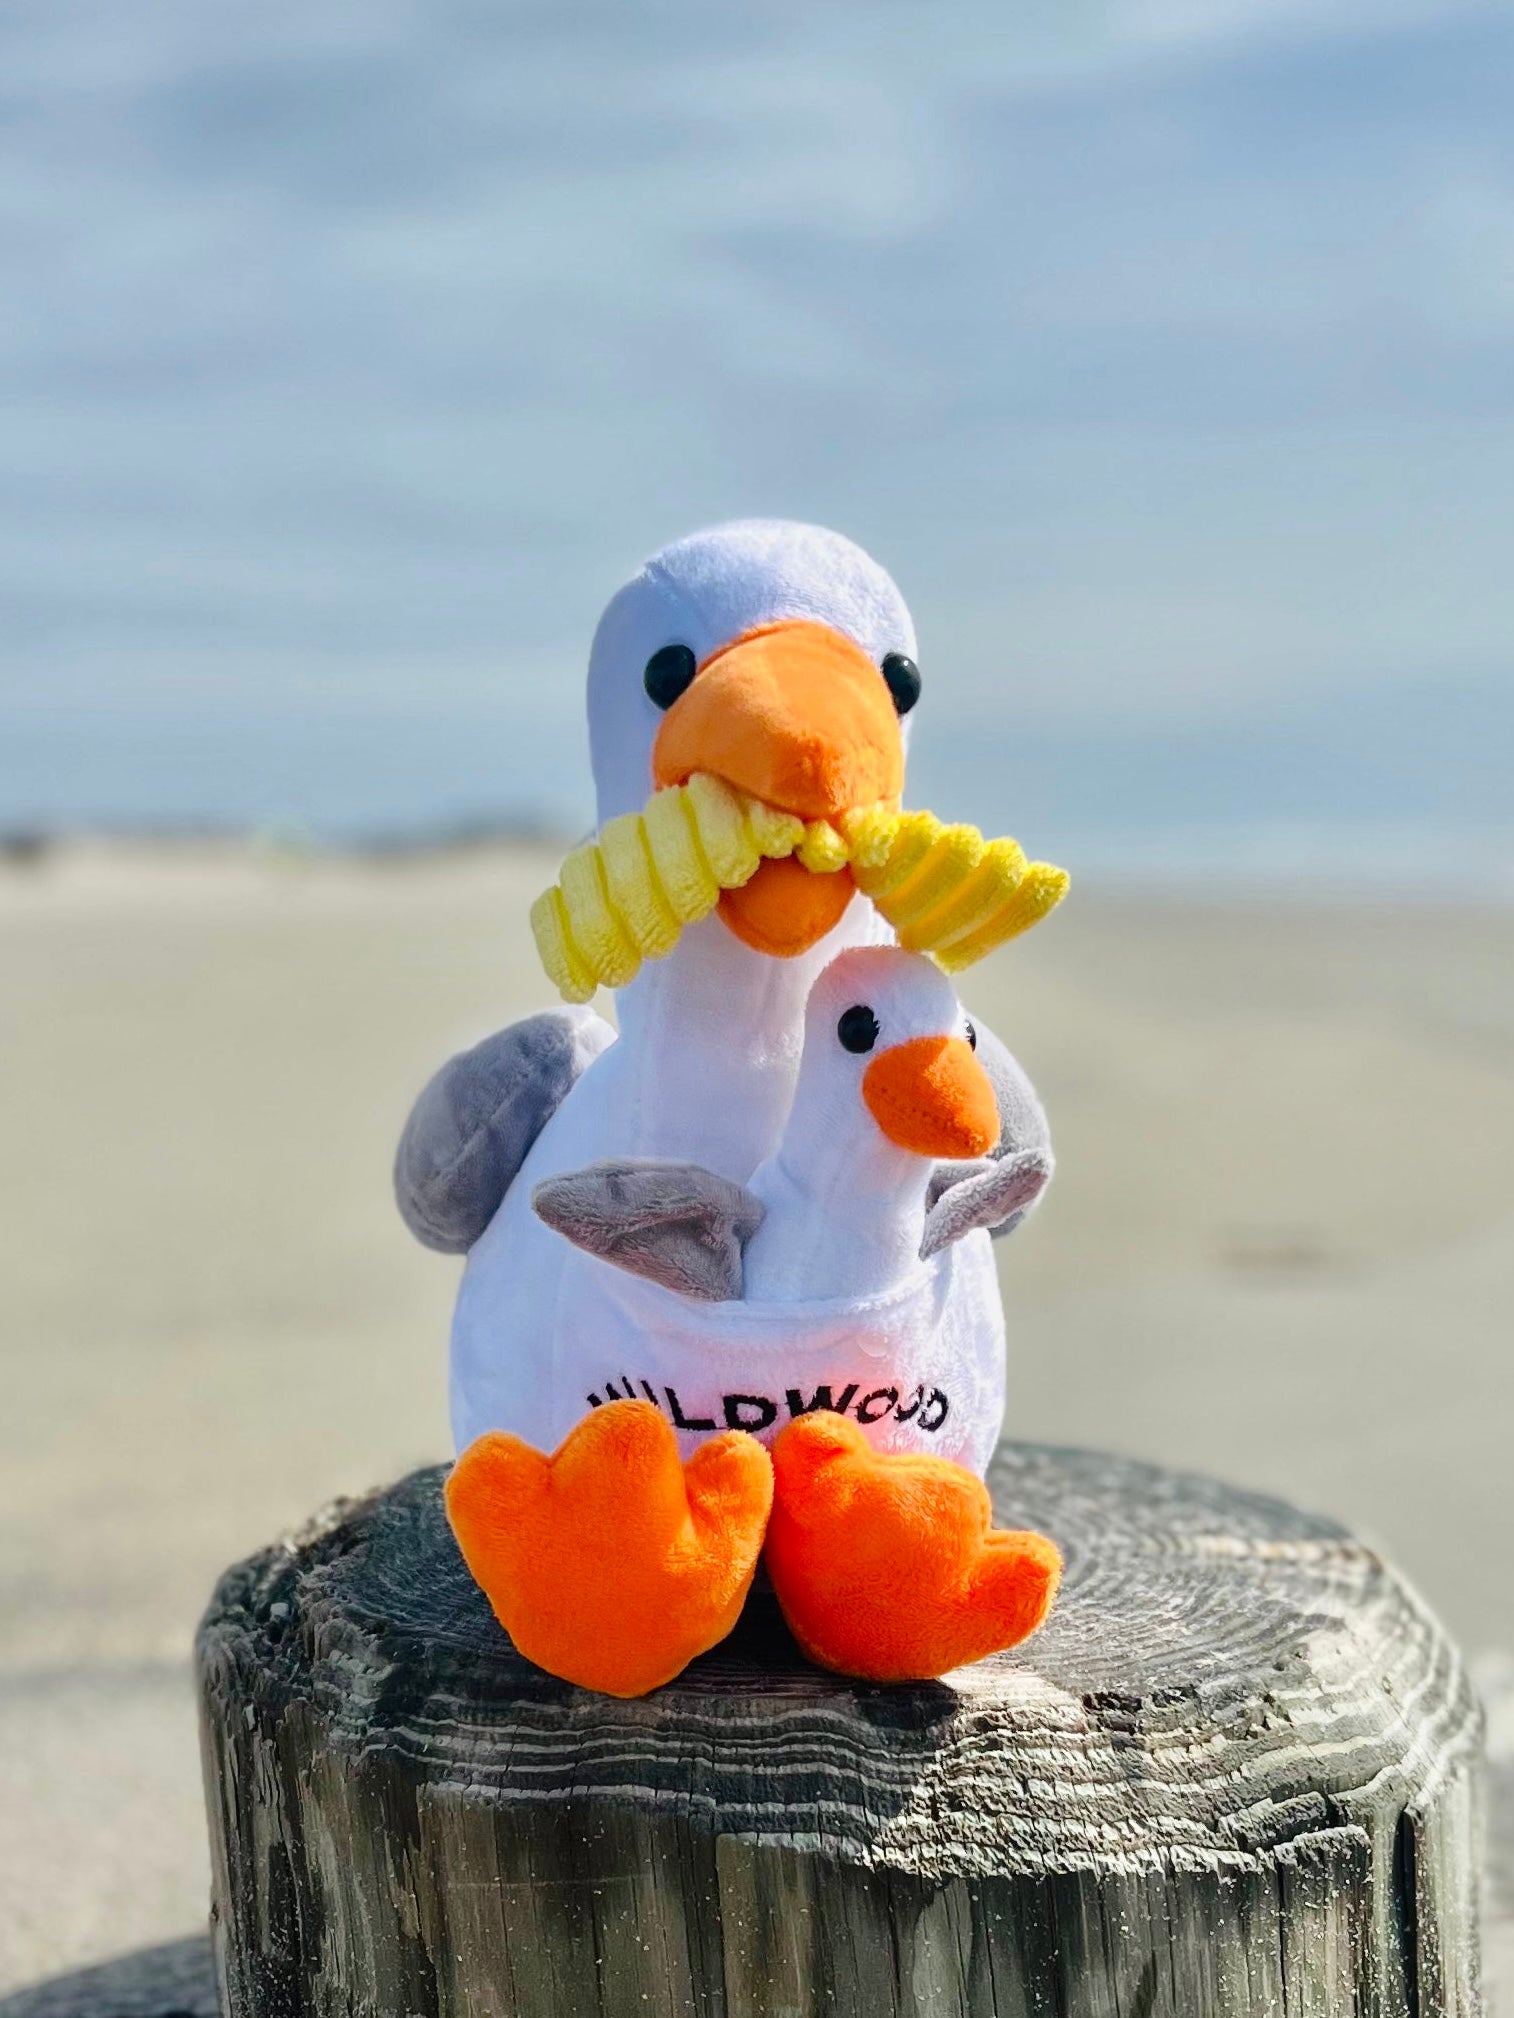 The Seagull Plush Toy with Baby – Wildwood Gift Shop